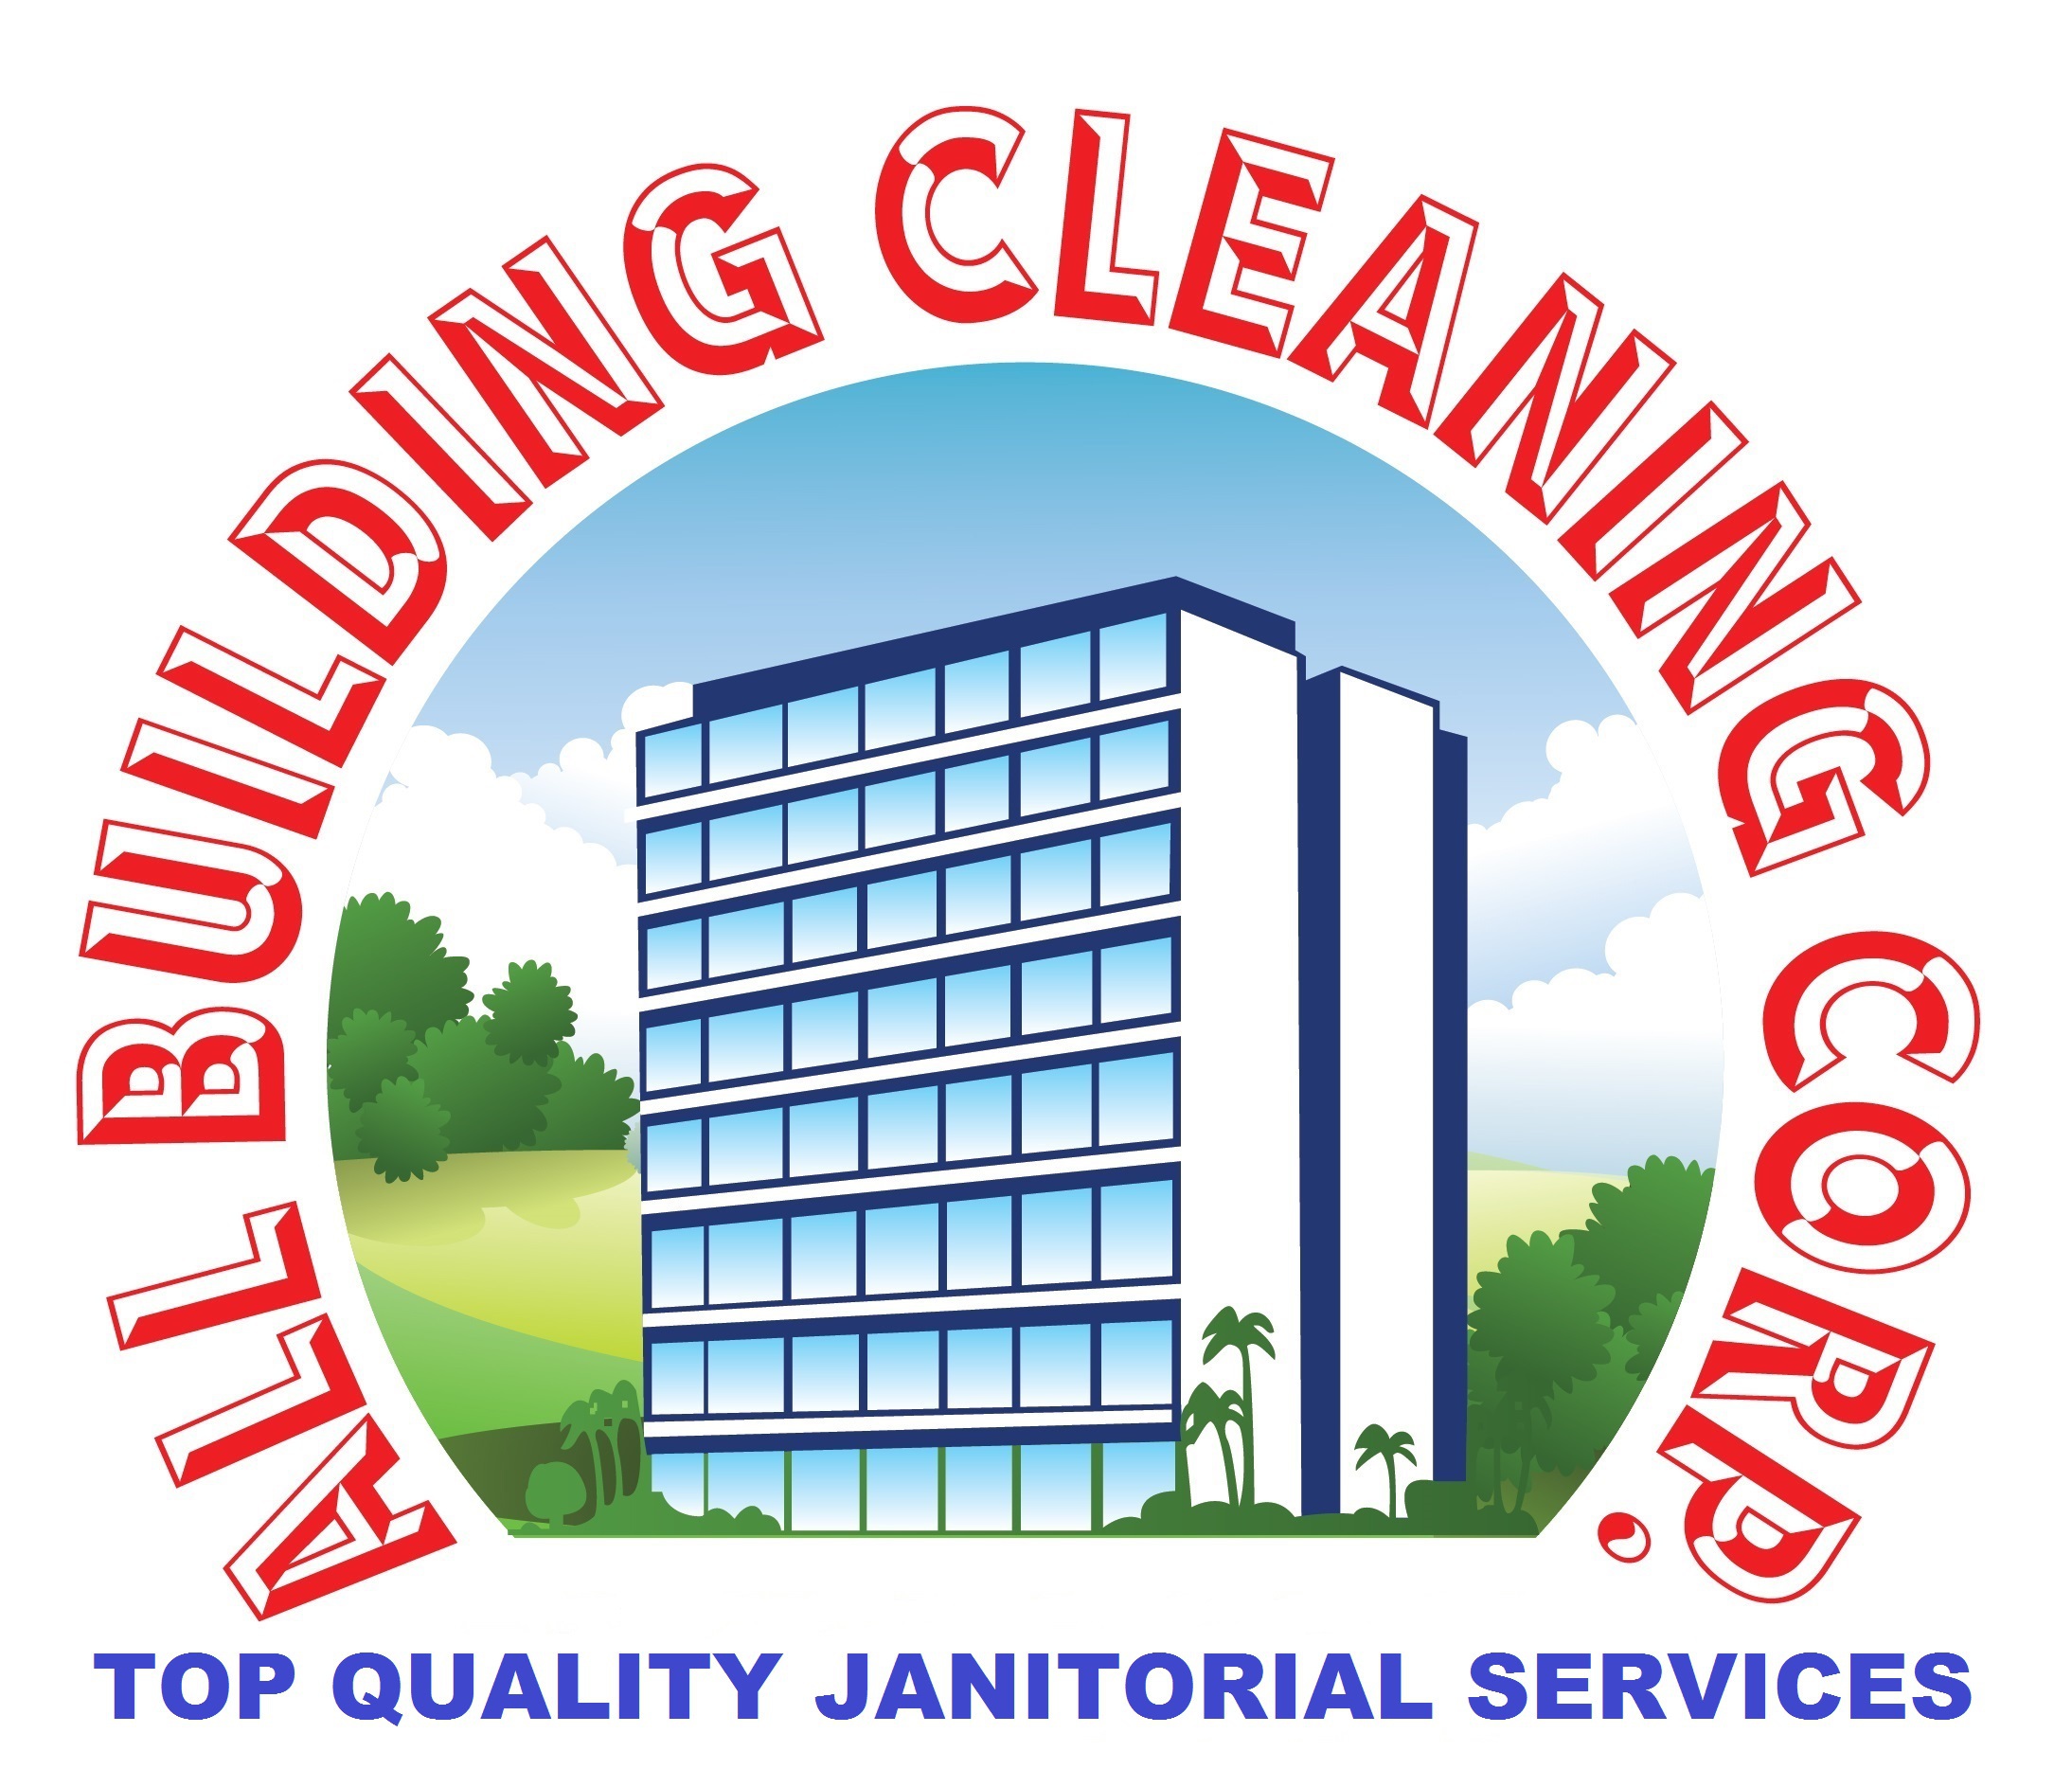 All Building Cleaning Corp.